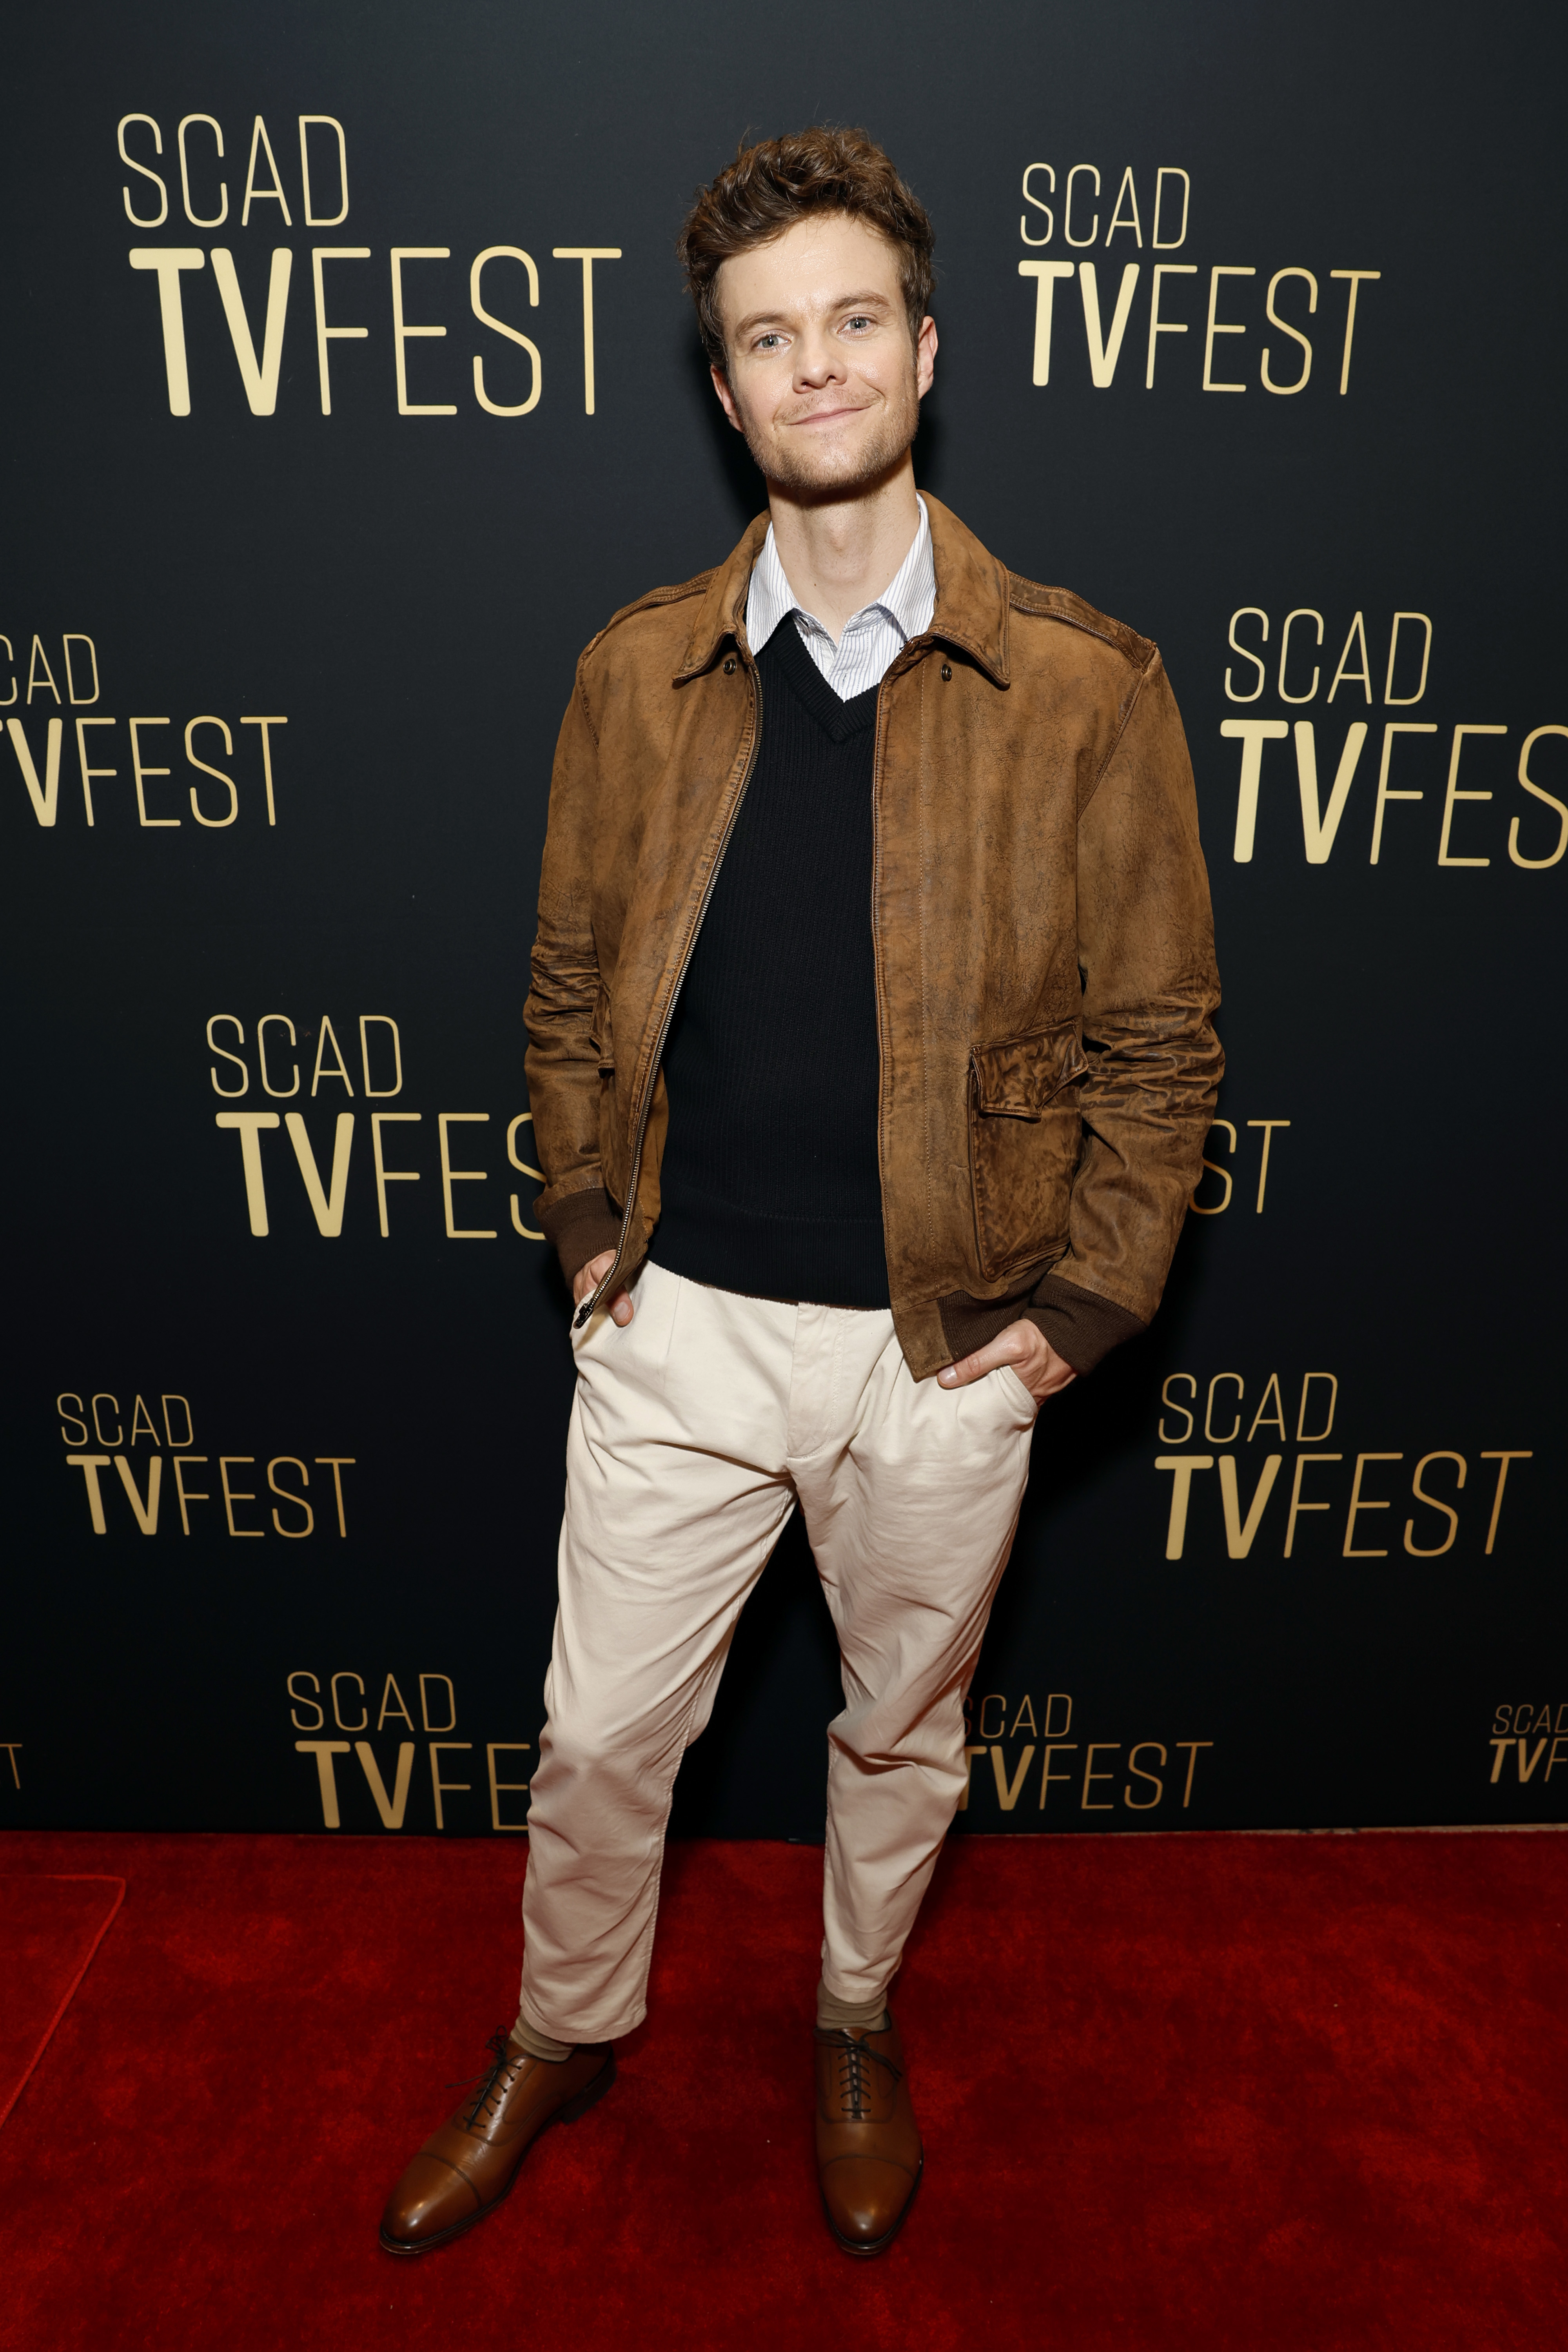 Jack Quaid poses on the red carpet at SCAD TVfest, wearing a brown jacket over a black sweater and white pants